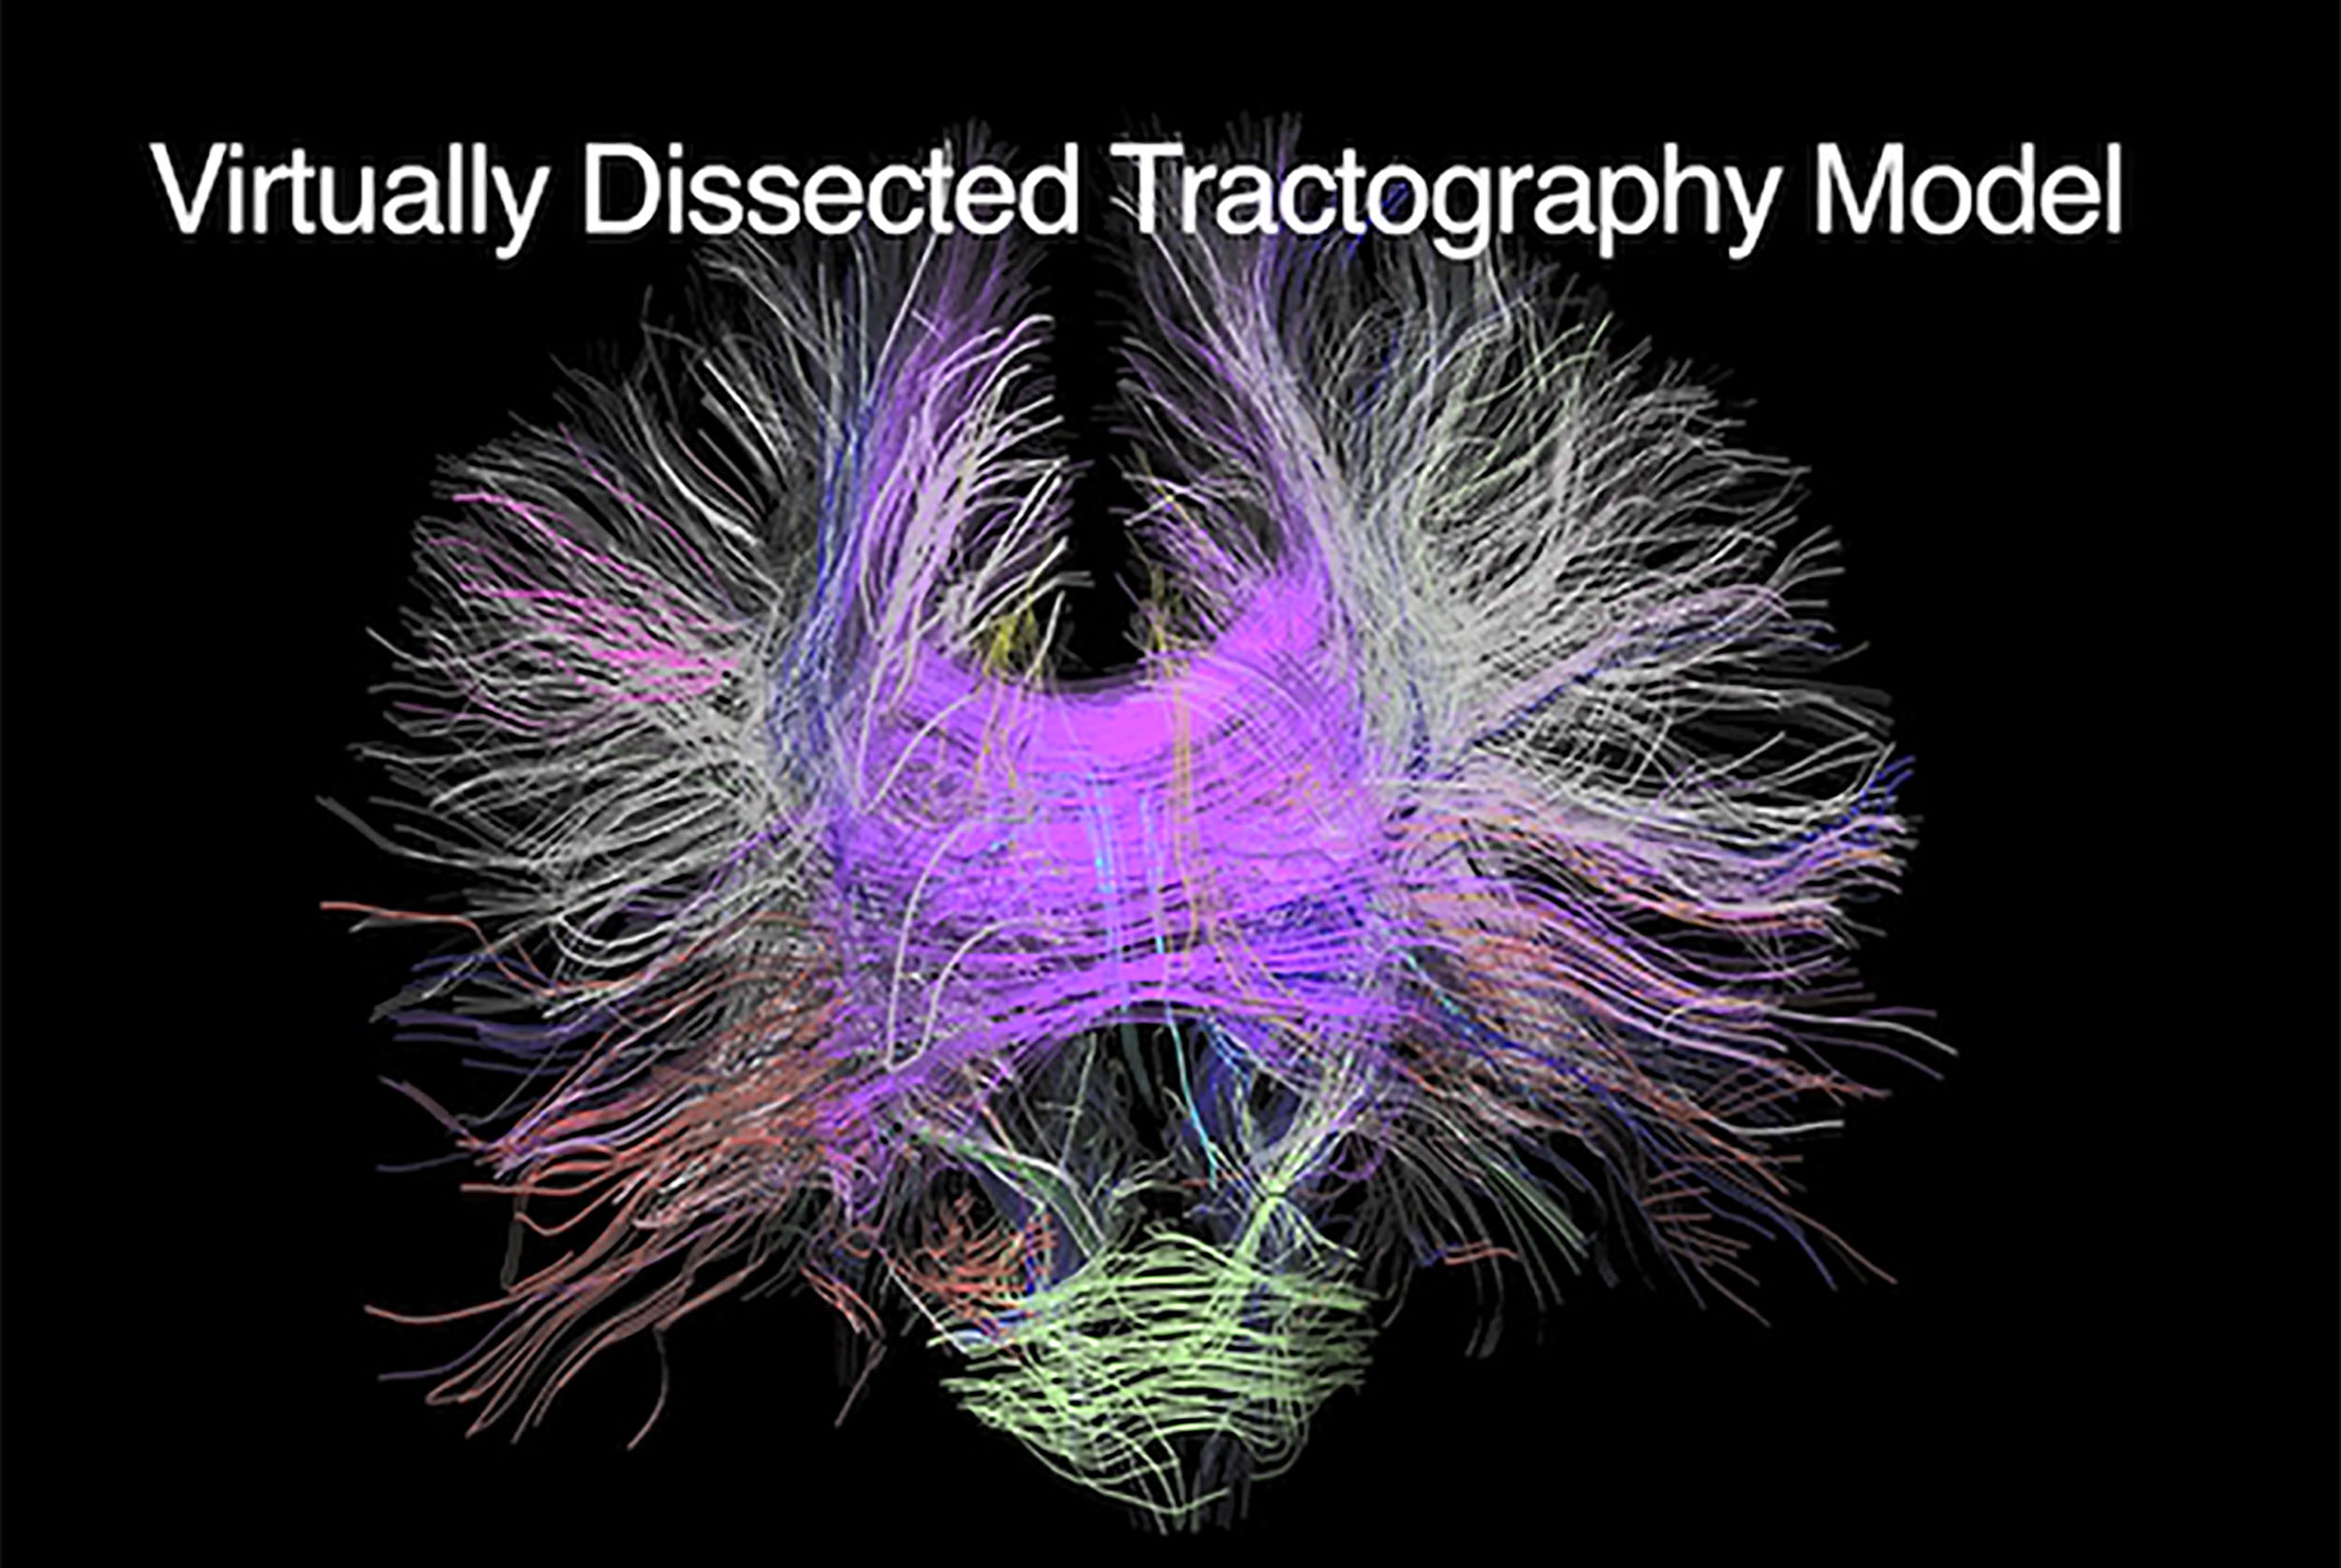 3D Brain Tractography